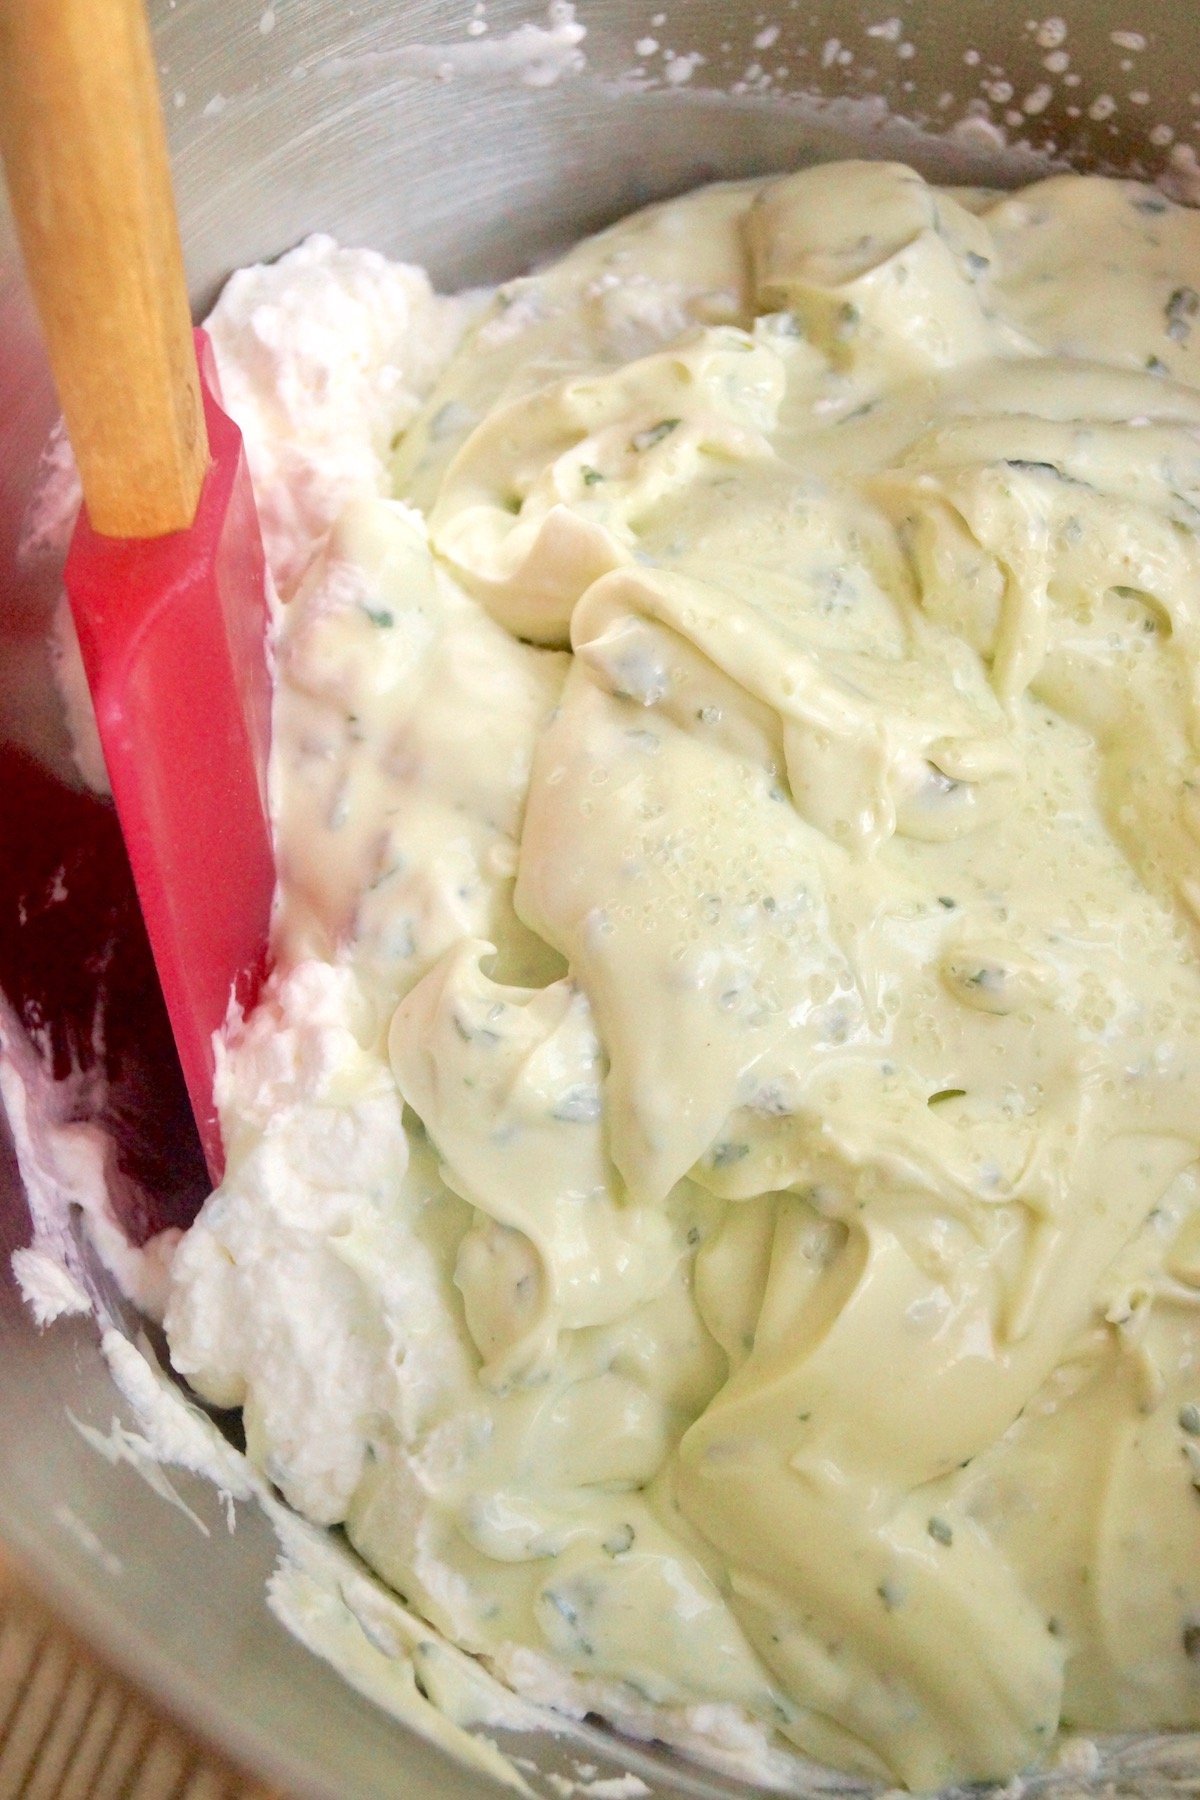 Bowl with pink rubber spatula folding basil cream cheese mixture into whipped cream.